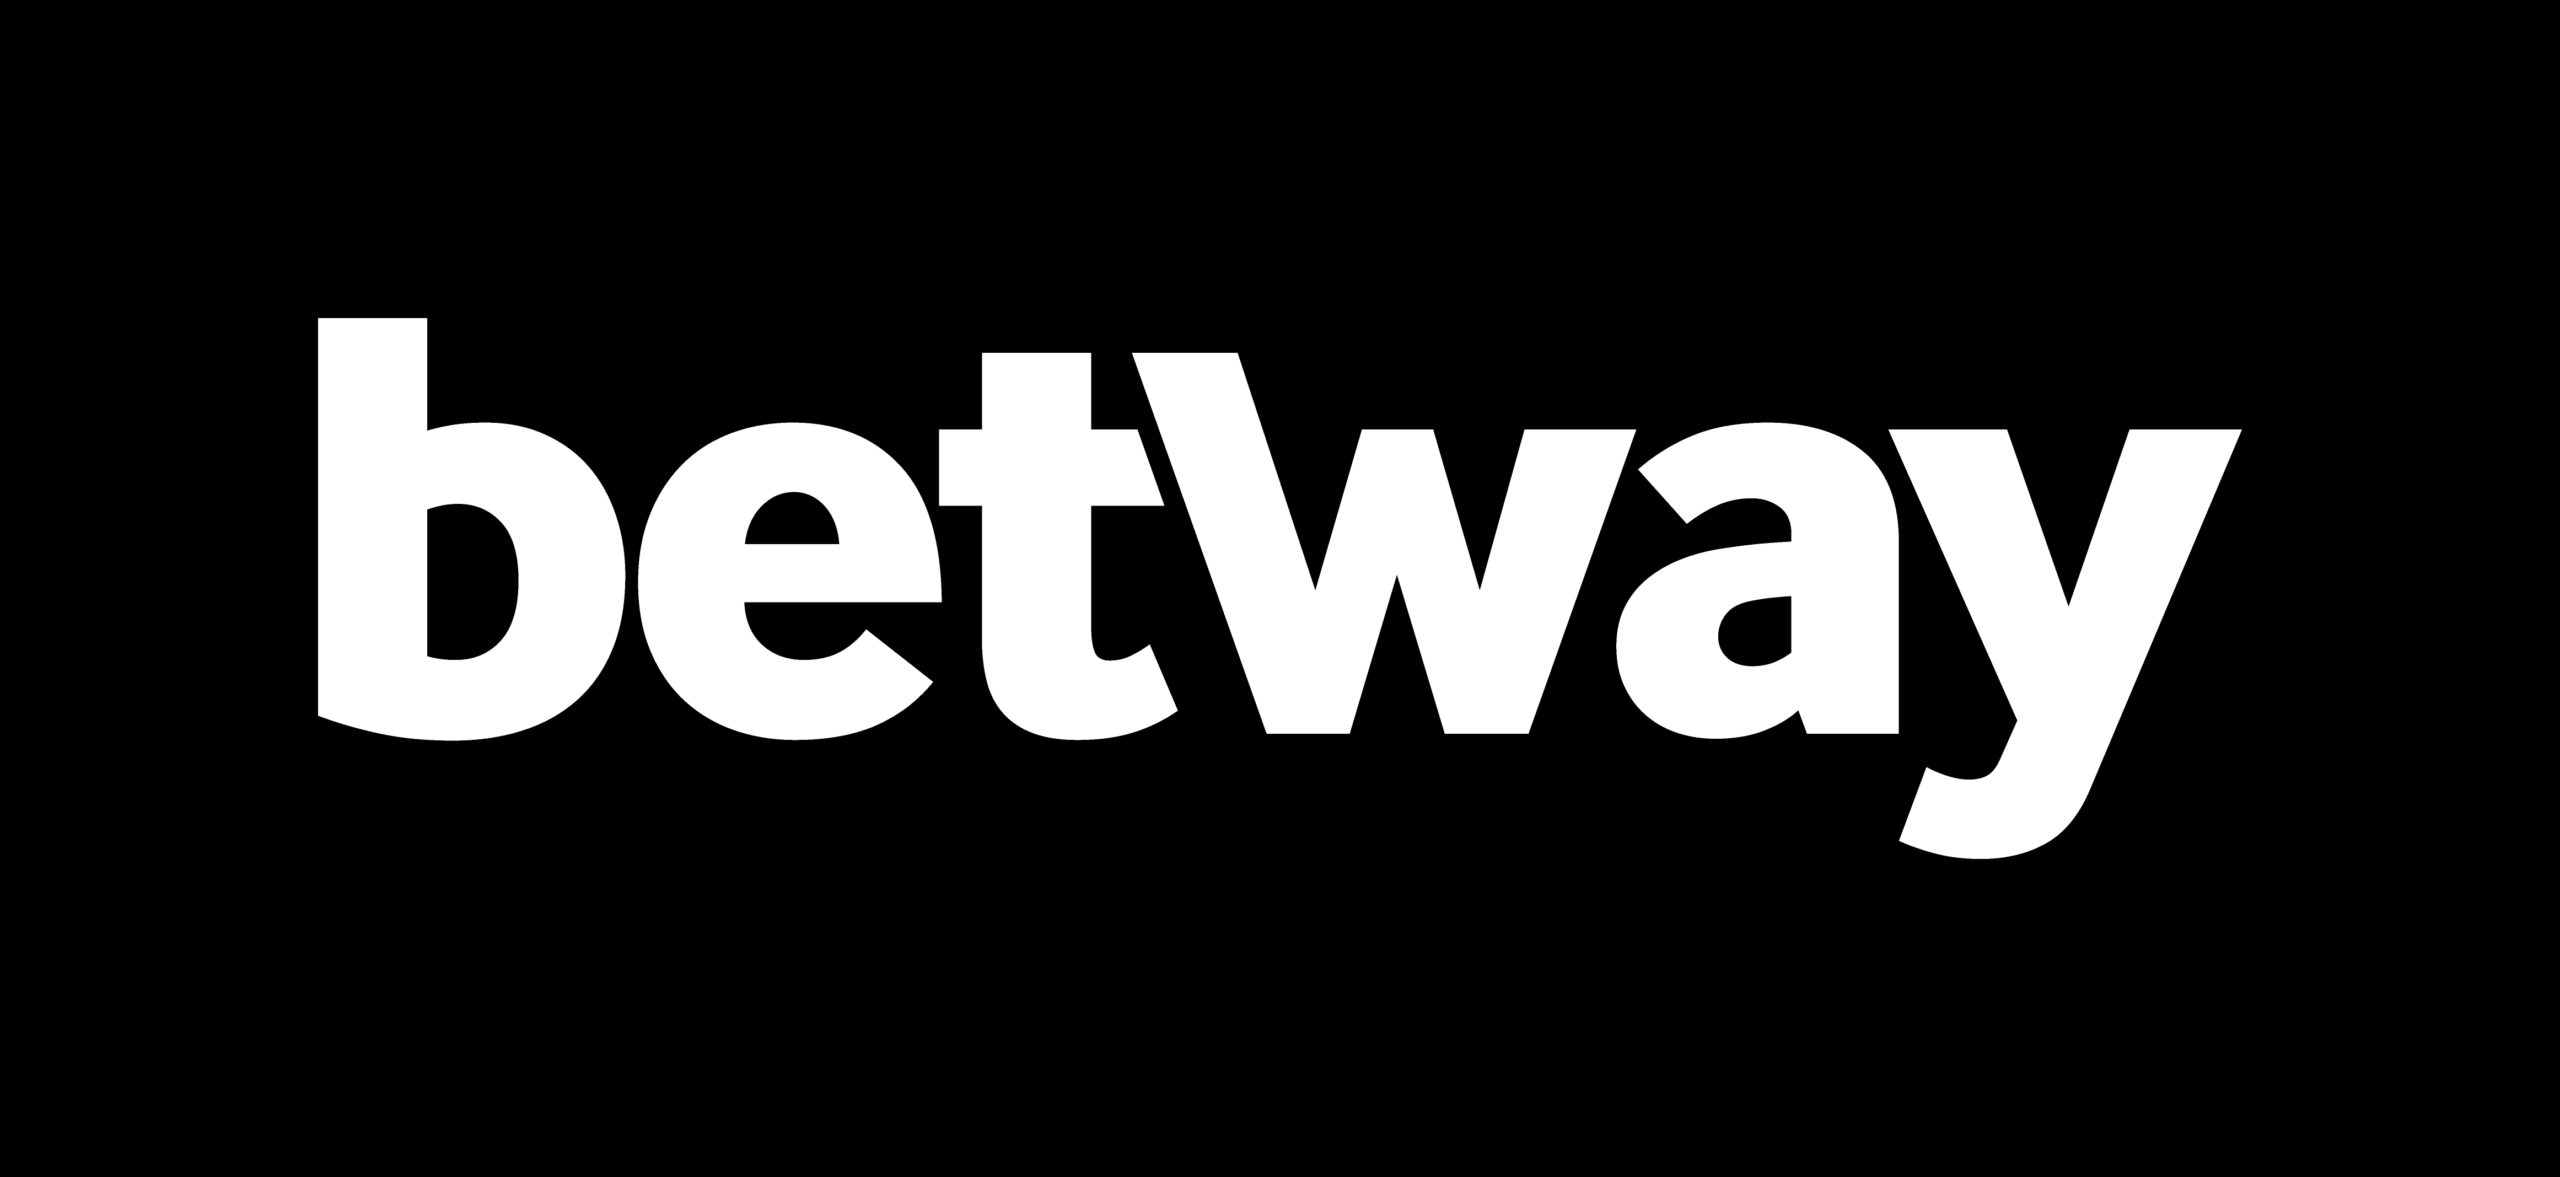 Register with Betway Africa, one of the most serious betting sites